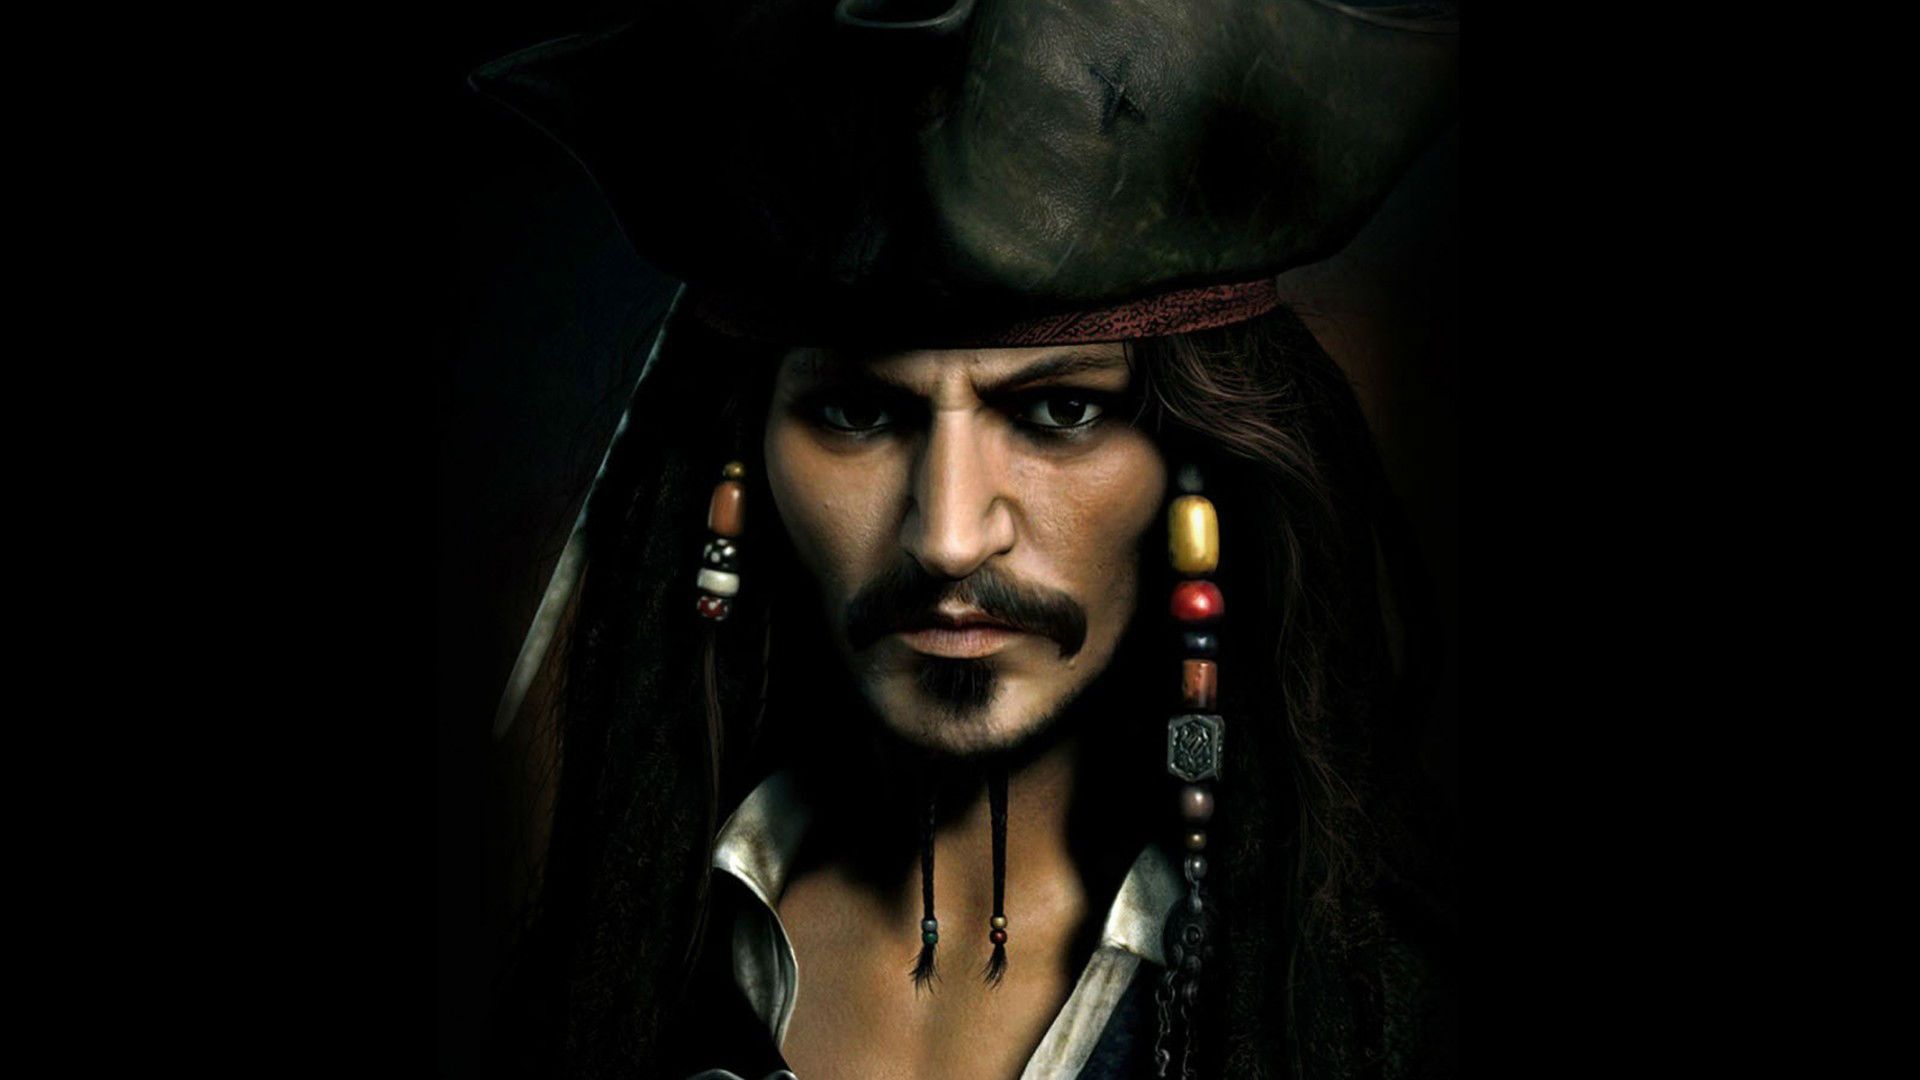 Pirates Of The Caribbean Computer Wallpapers, Desktop Backgrounds ...